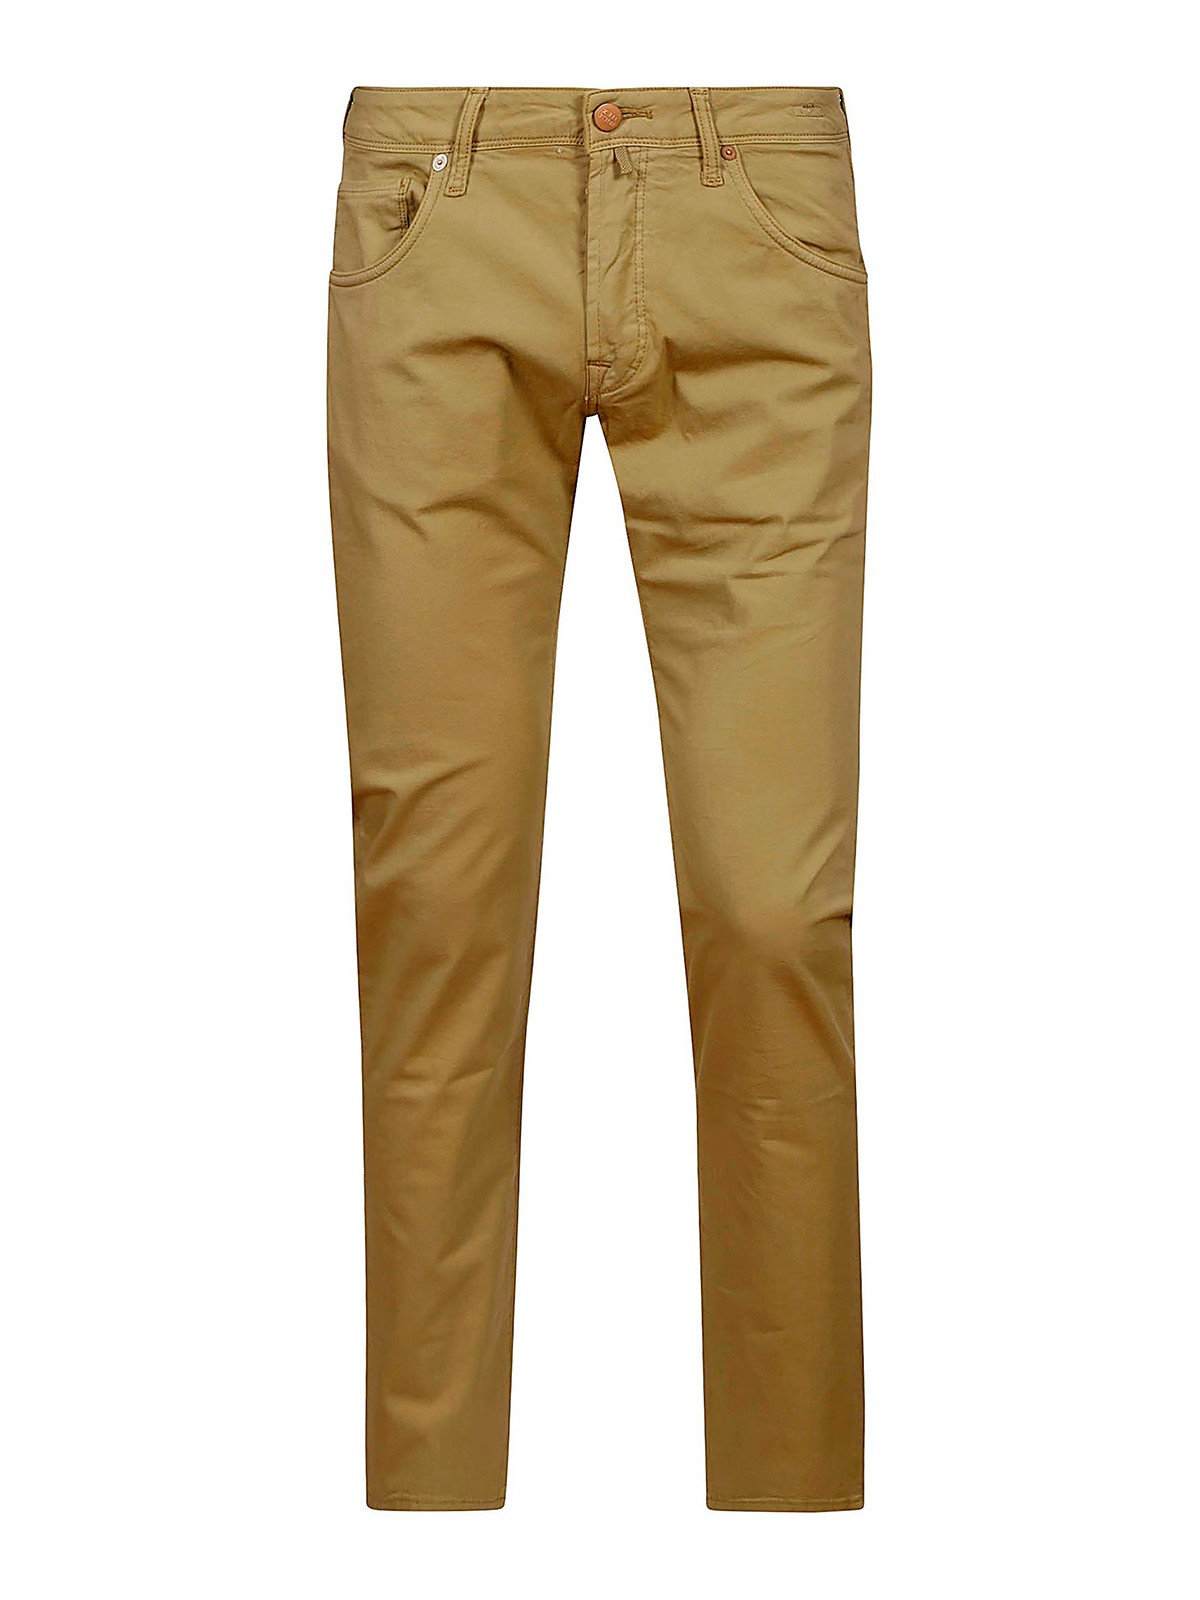 Incotex Jeans Style Trousers In Camel